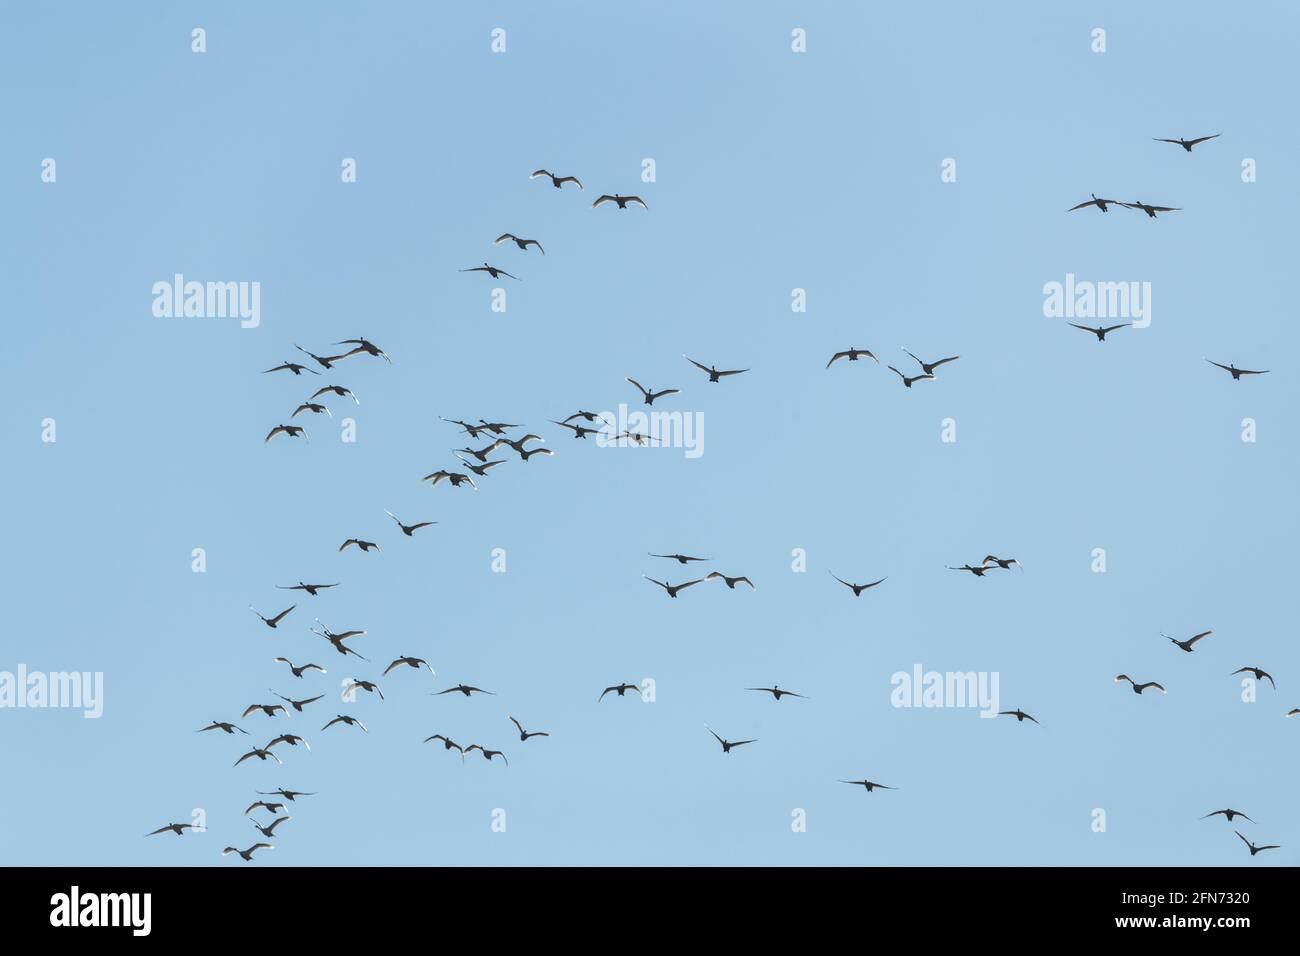 Large flock of geese seen in northern Canada during spring time. Canadian goose flocks in wildlife, natural outdoor environment. Migrating birds. Stock Photo